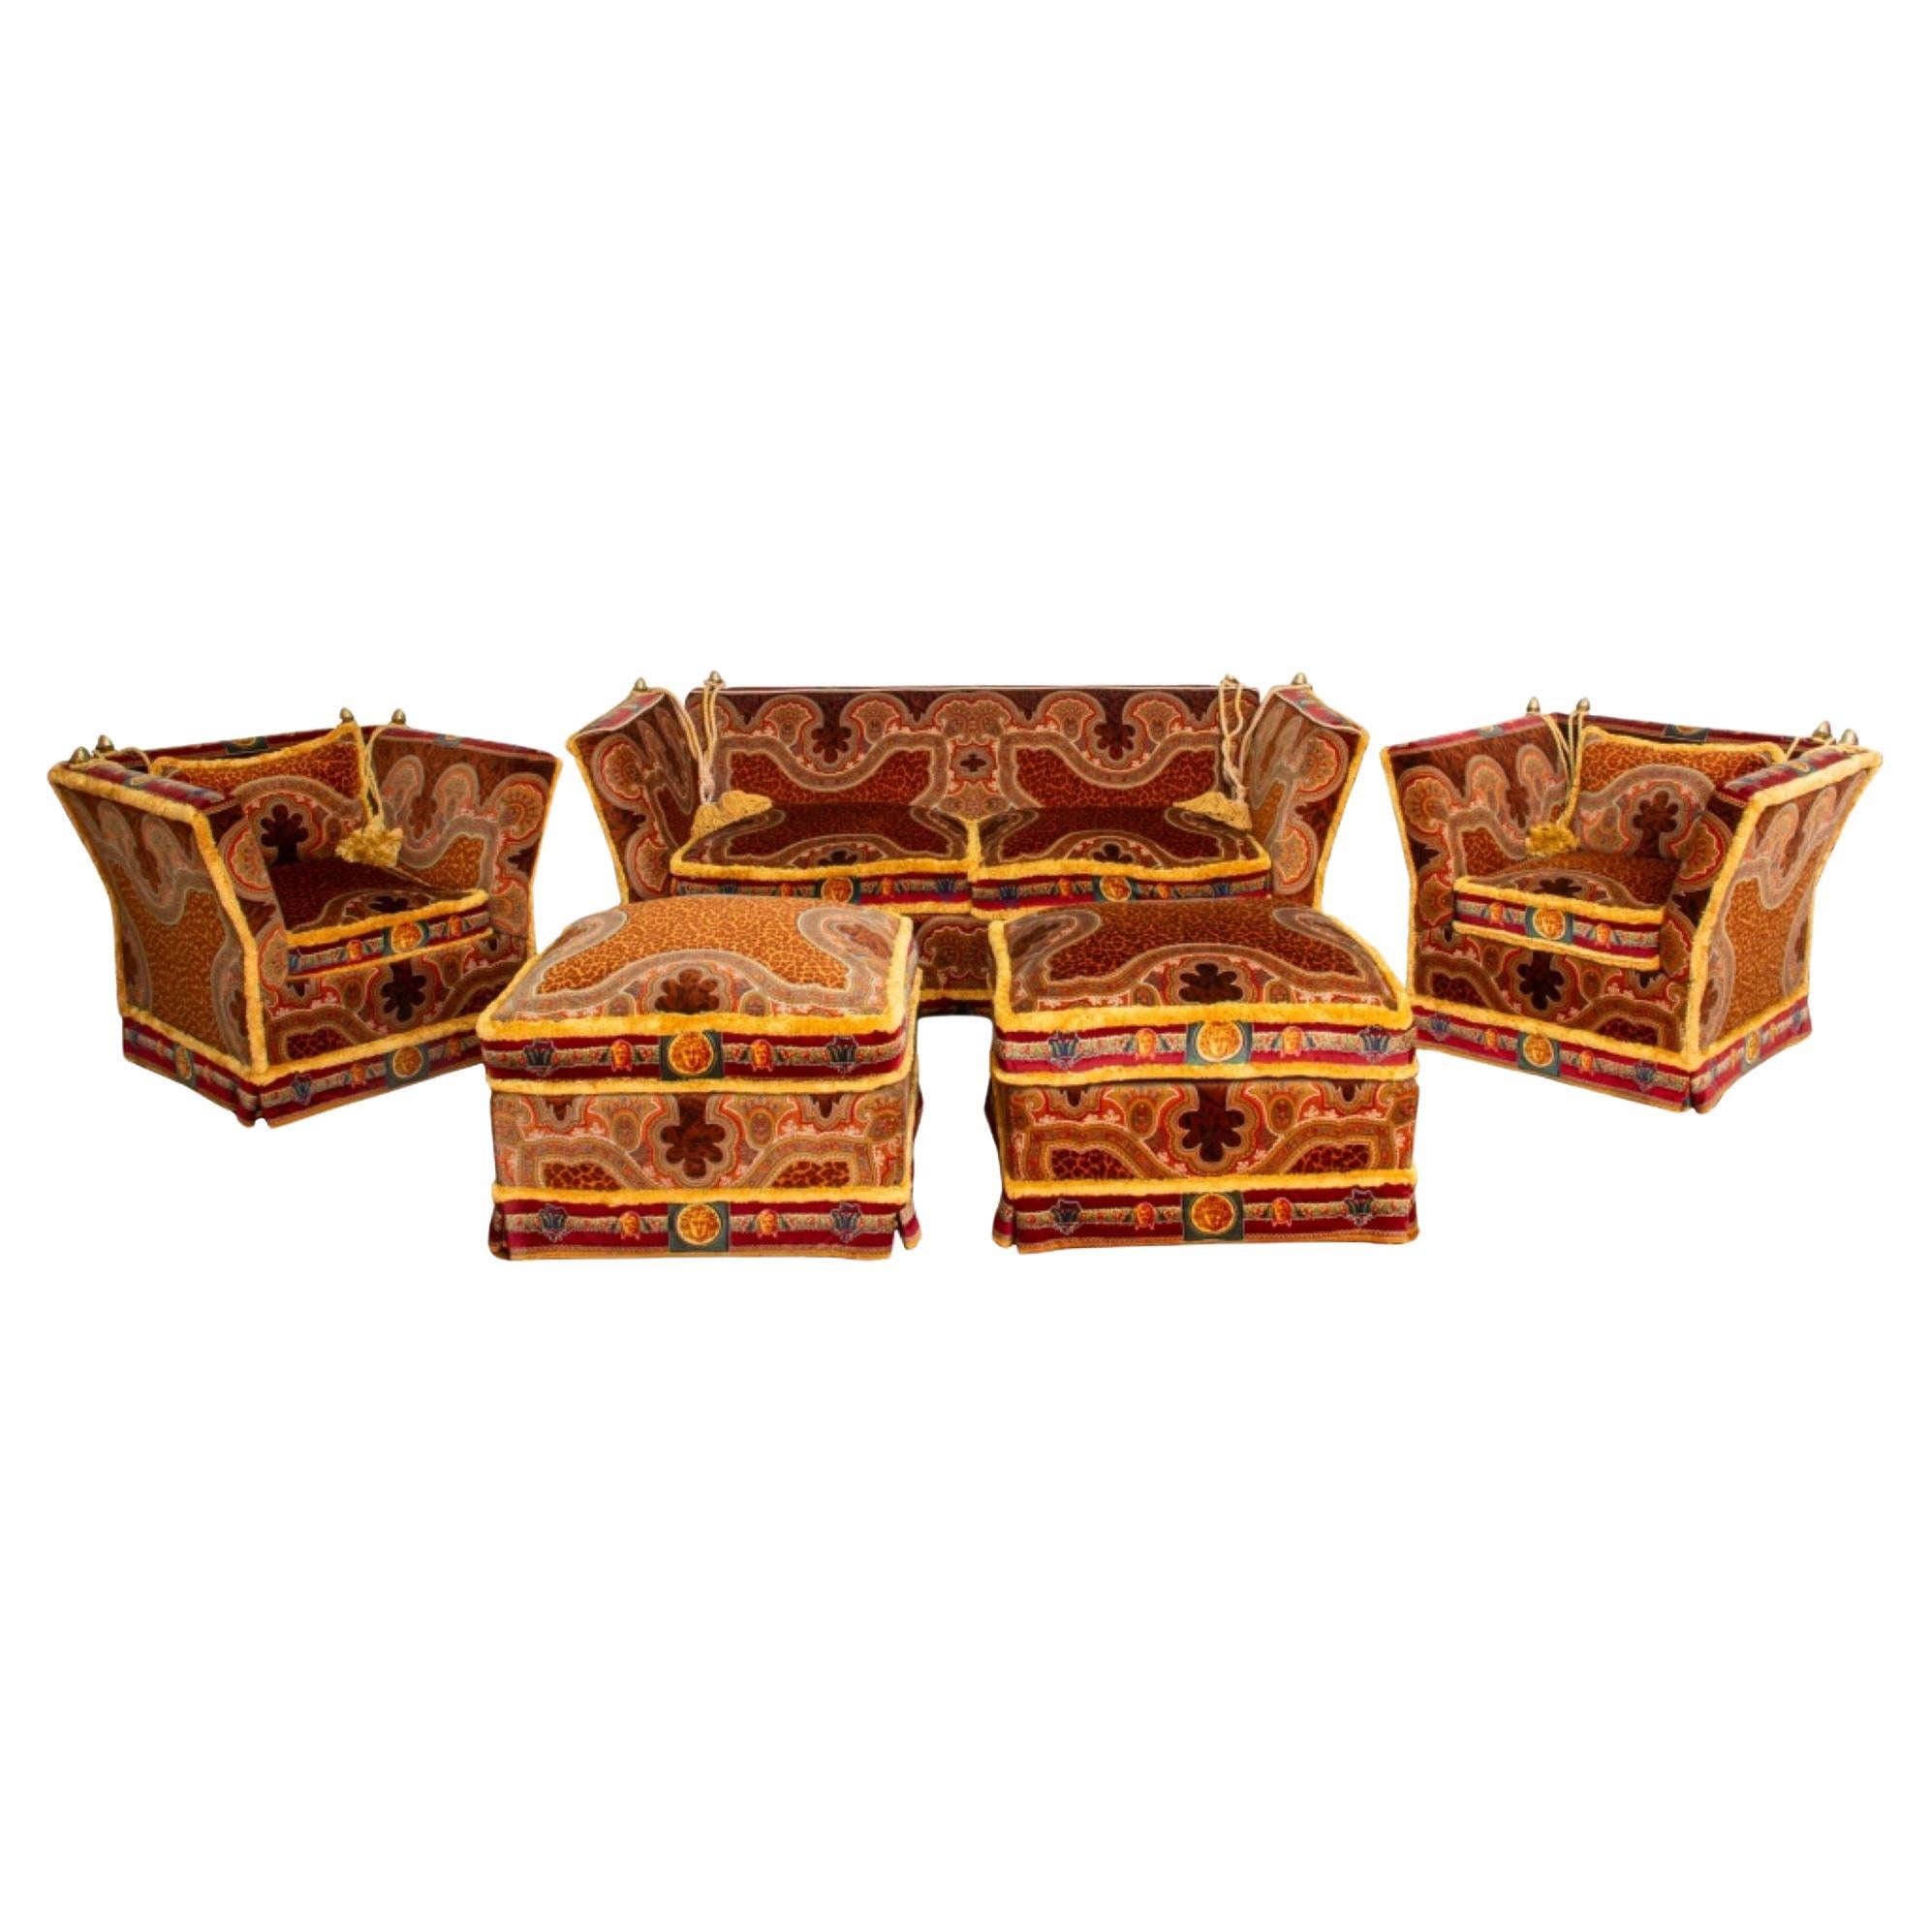 Gianni Versace Upholstered Knole Suite, 7 Pc For Sale